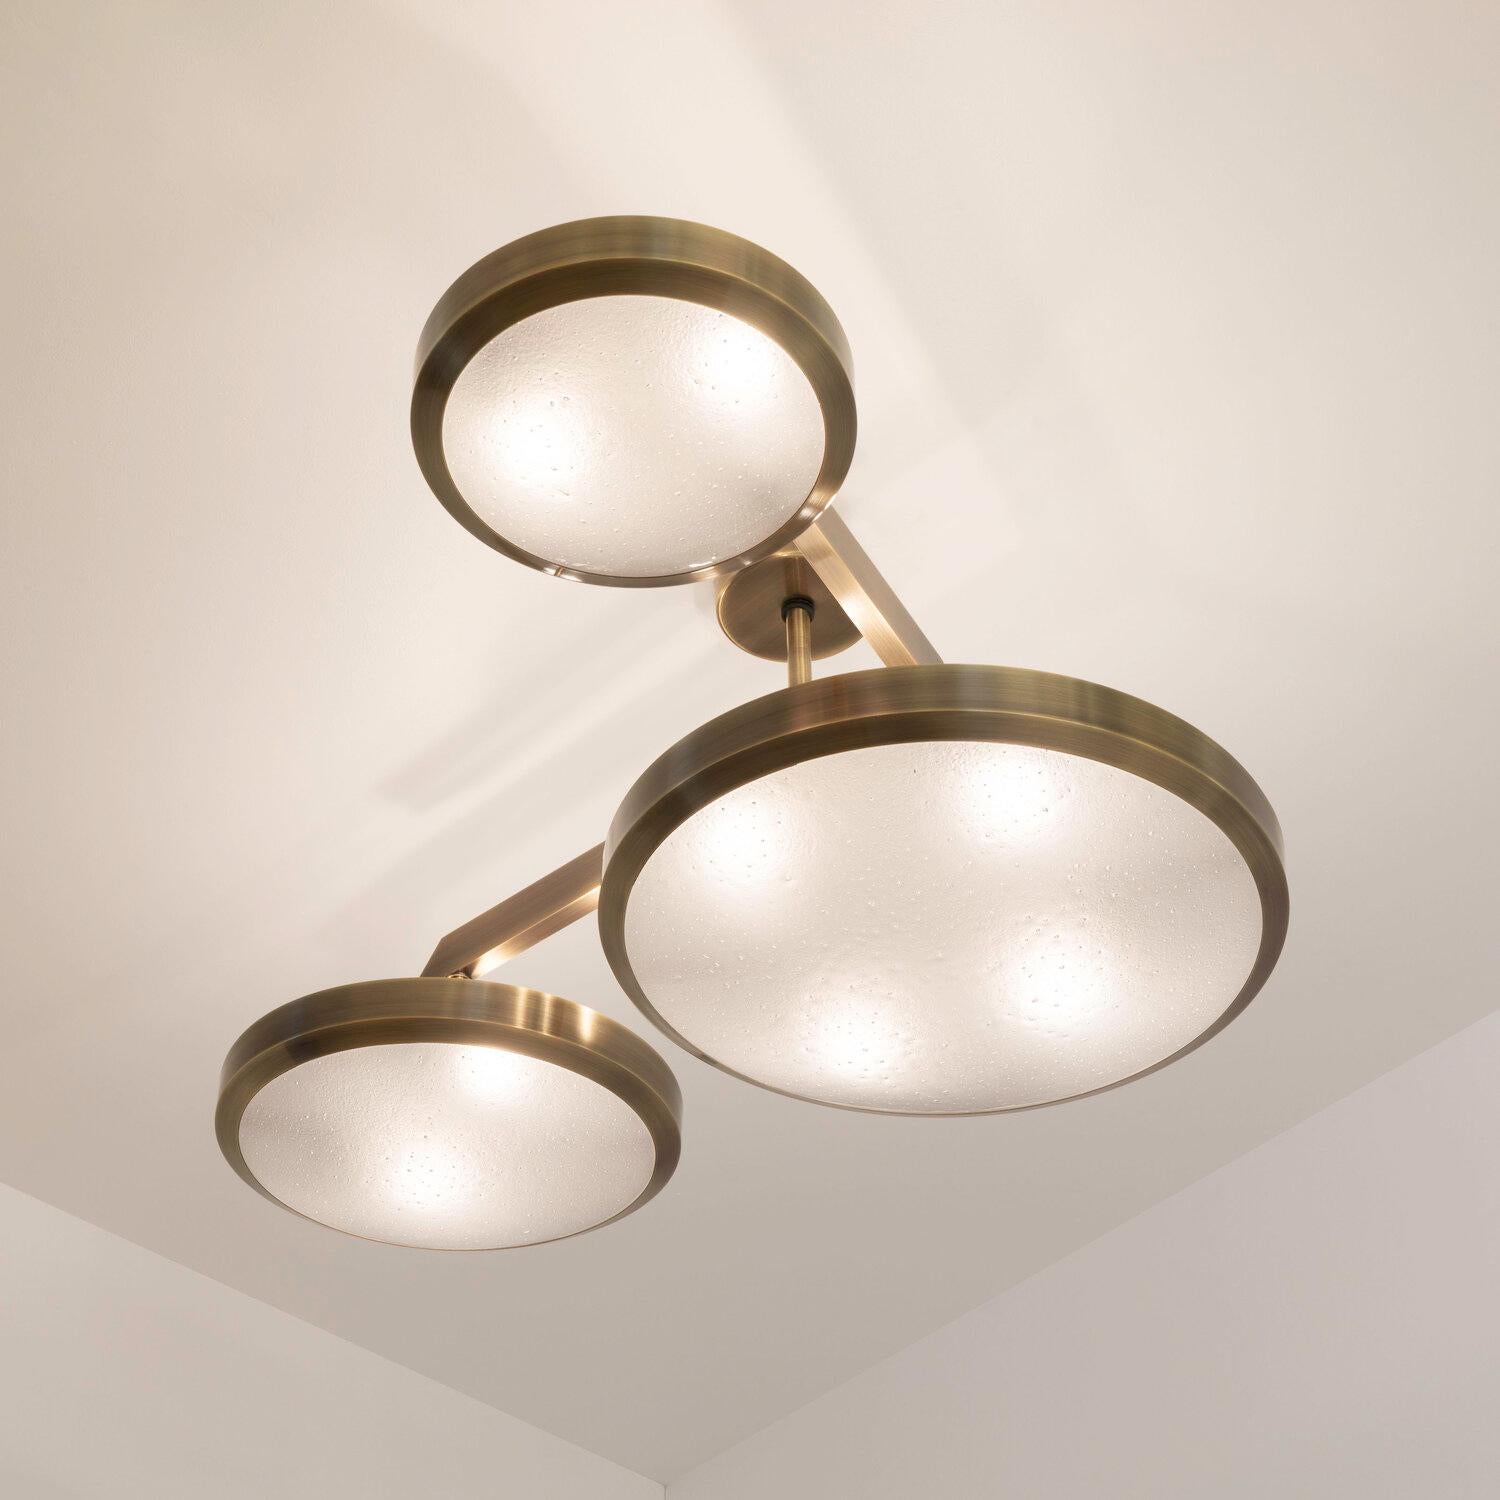 Zeta Ceiling Light by Gaspare Asaro - Polished Brass Finish For Sale 1